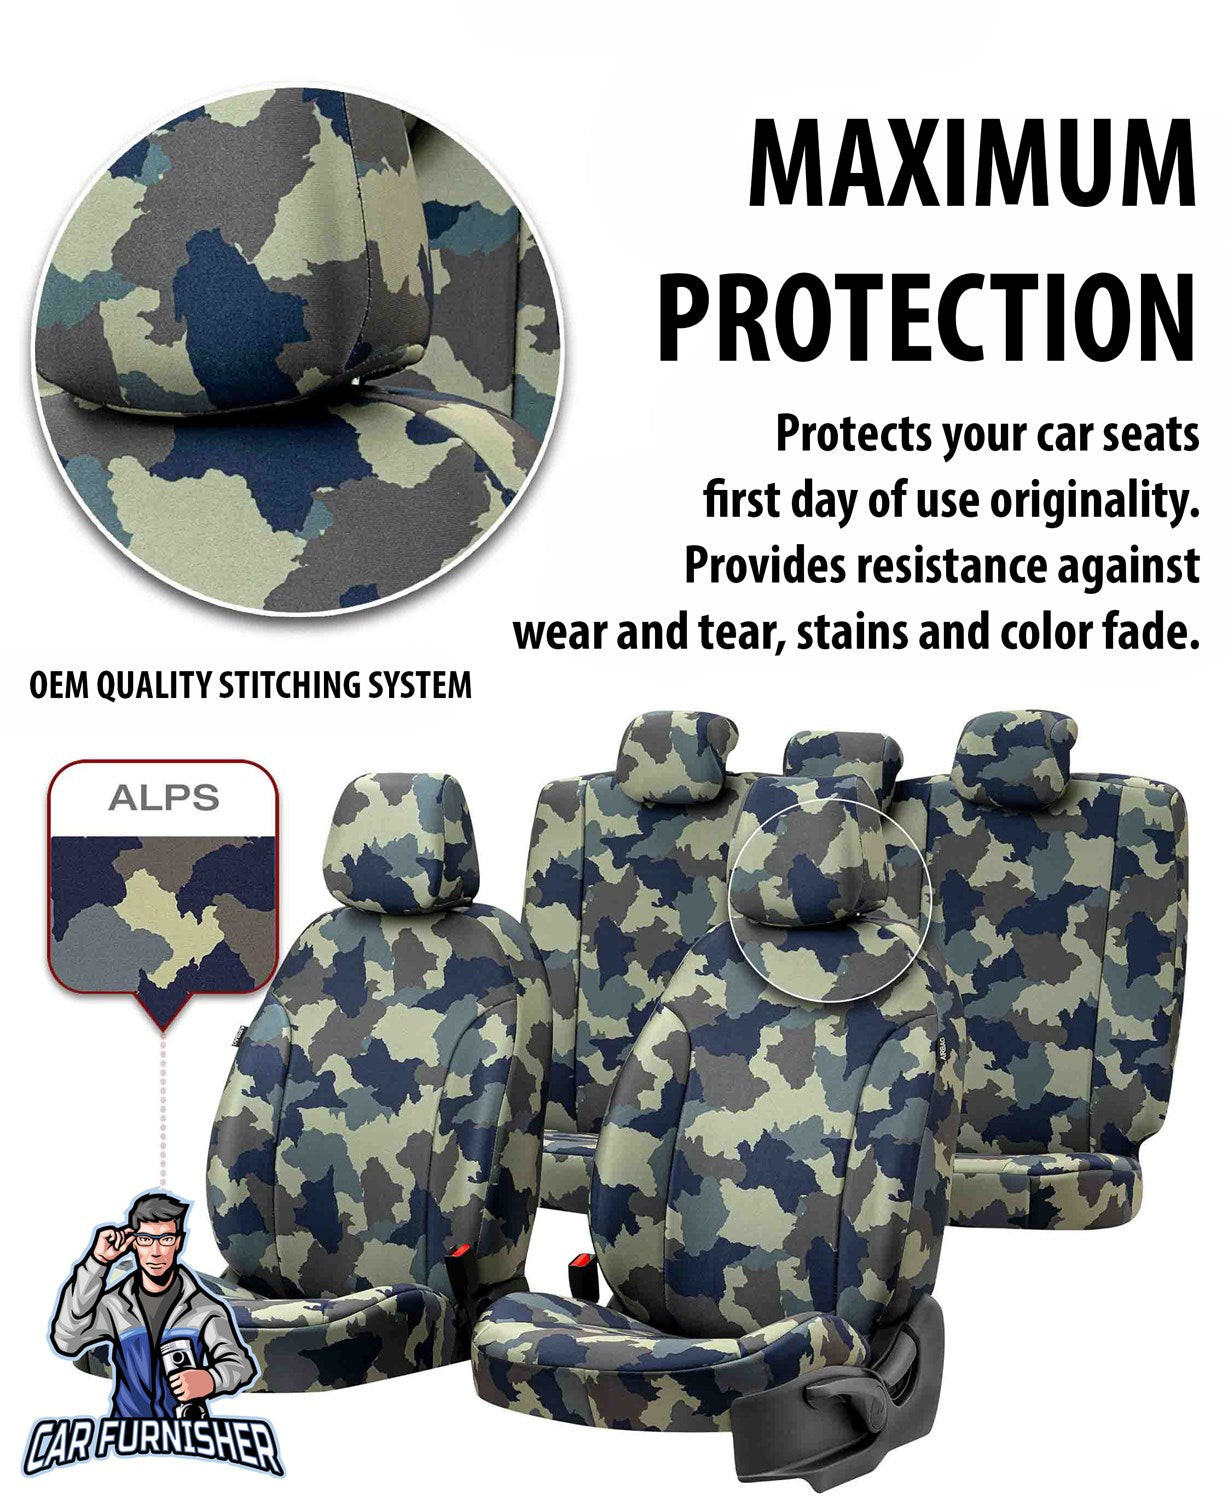 Chevrolet Aveo Car Seat Cover 2003-2023 T200/T250/T300 Camouflage Mojave Camo Full Set (5 Seats + Handrest) Fabric